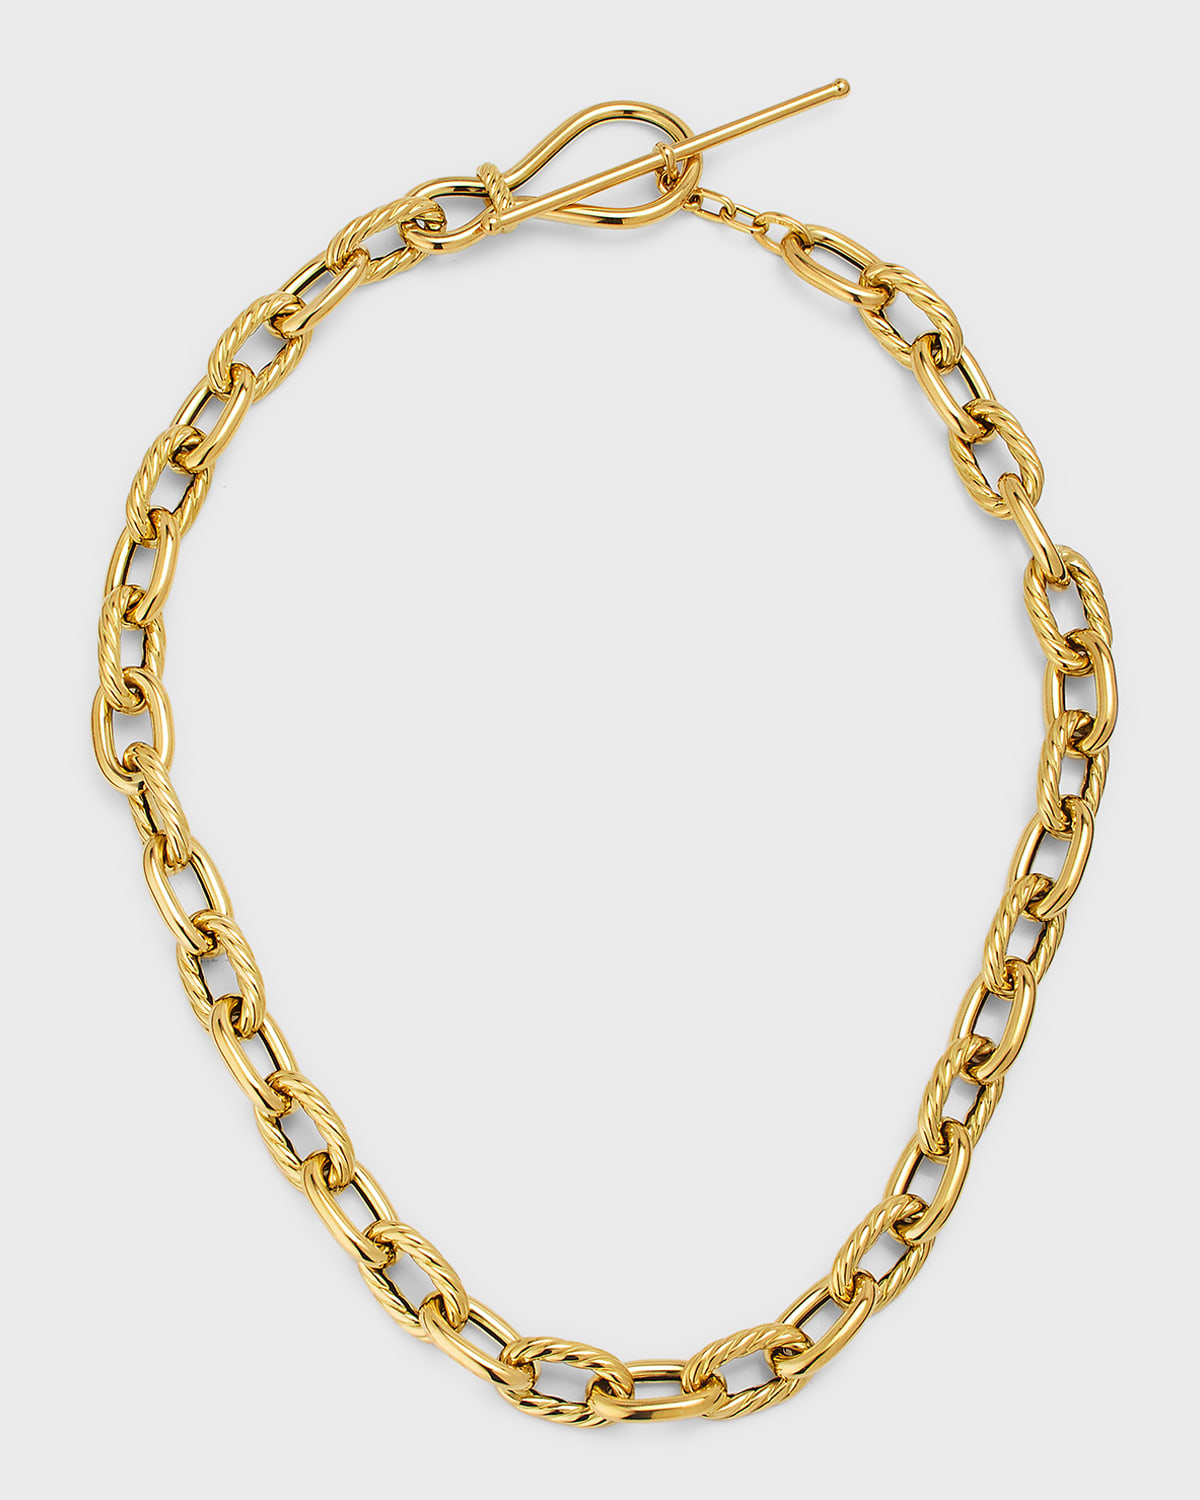 18K Gold Snake Chain Necklace, 8mm, 18"L